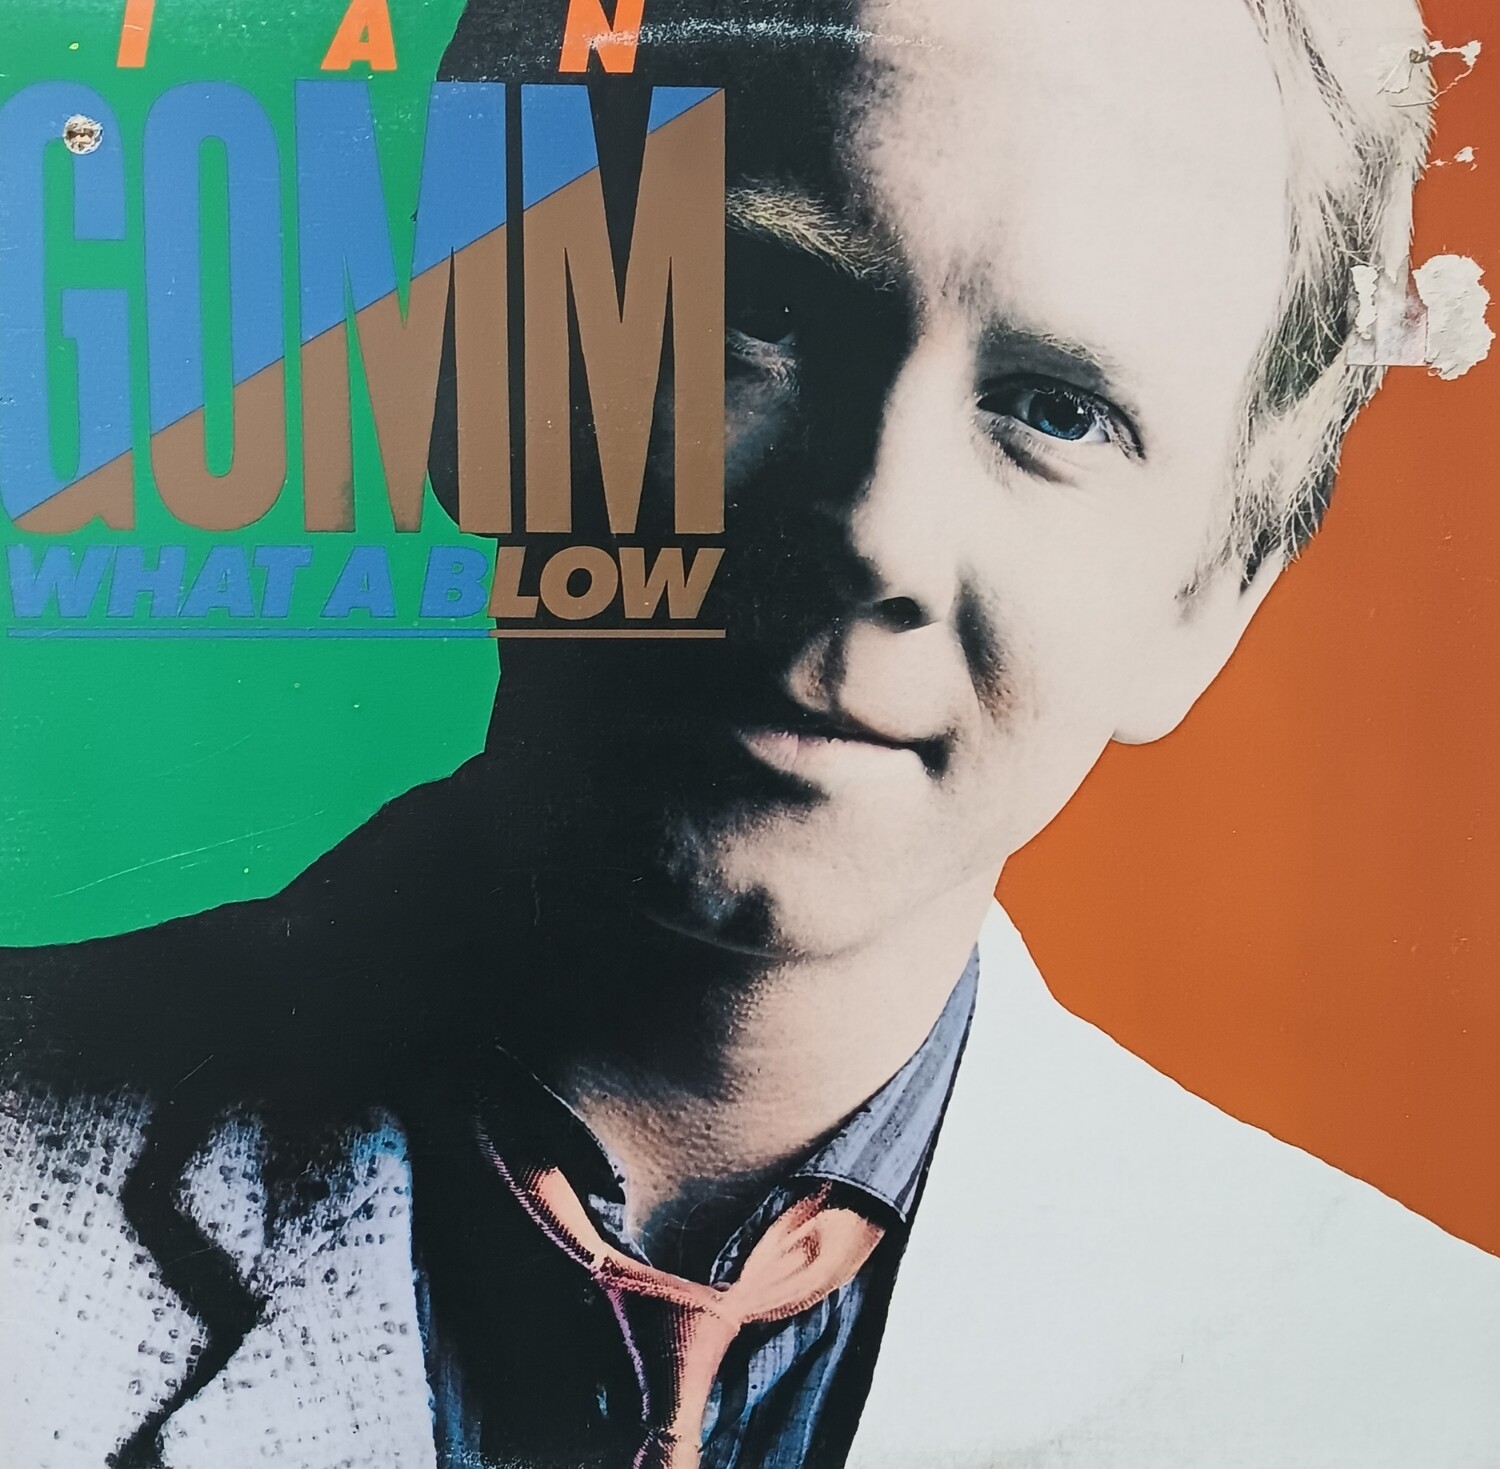 IAN GOMM - What a blow